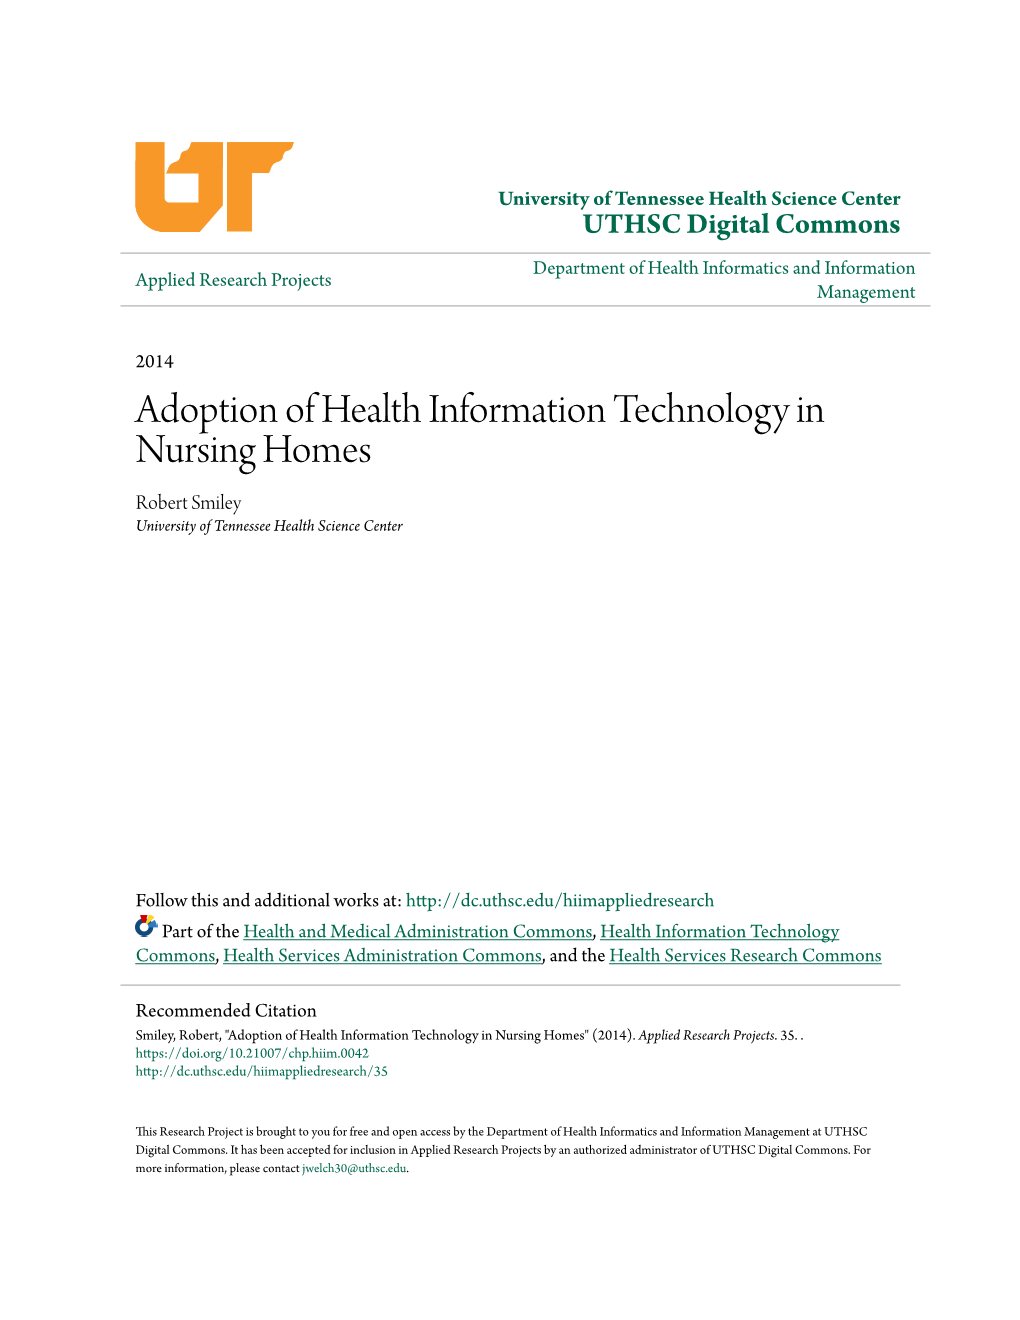 Adoption of Health Information Technology in Nursing Homes Robert Smiley University of Tennessee Health Science Center